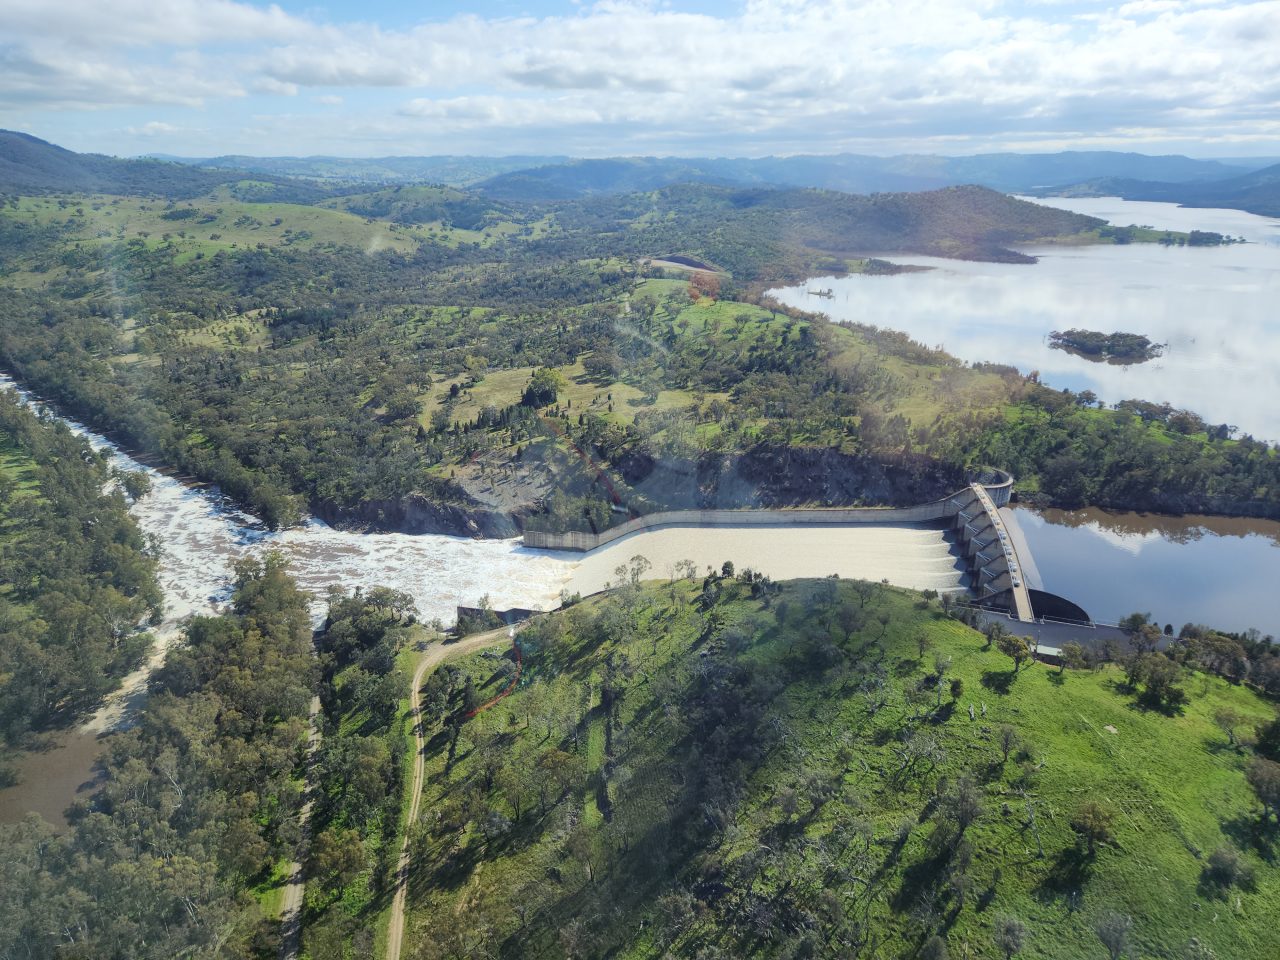 Aerial photo of a dam overflowing via the spillway into a river. The water is white where it is spilling out. The still water surface is reflecting the cloudy sky.  The land surrounding the dam is green and vegetated with trees but has some cleared land also very green. 